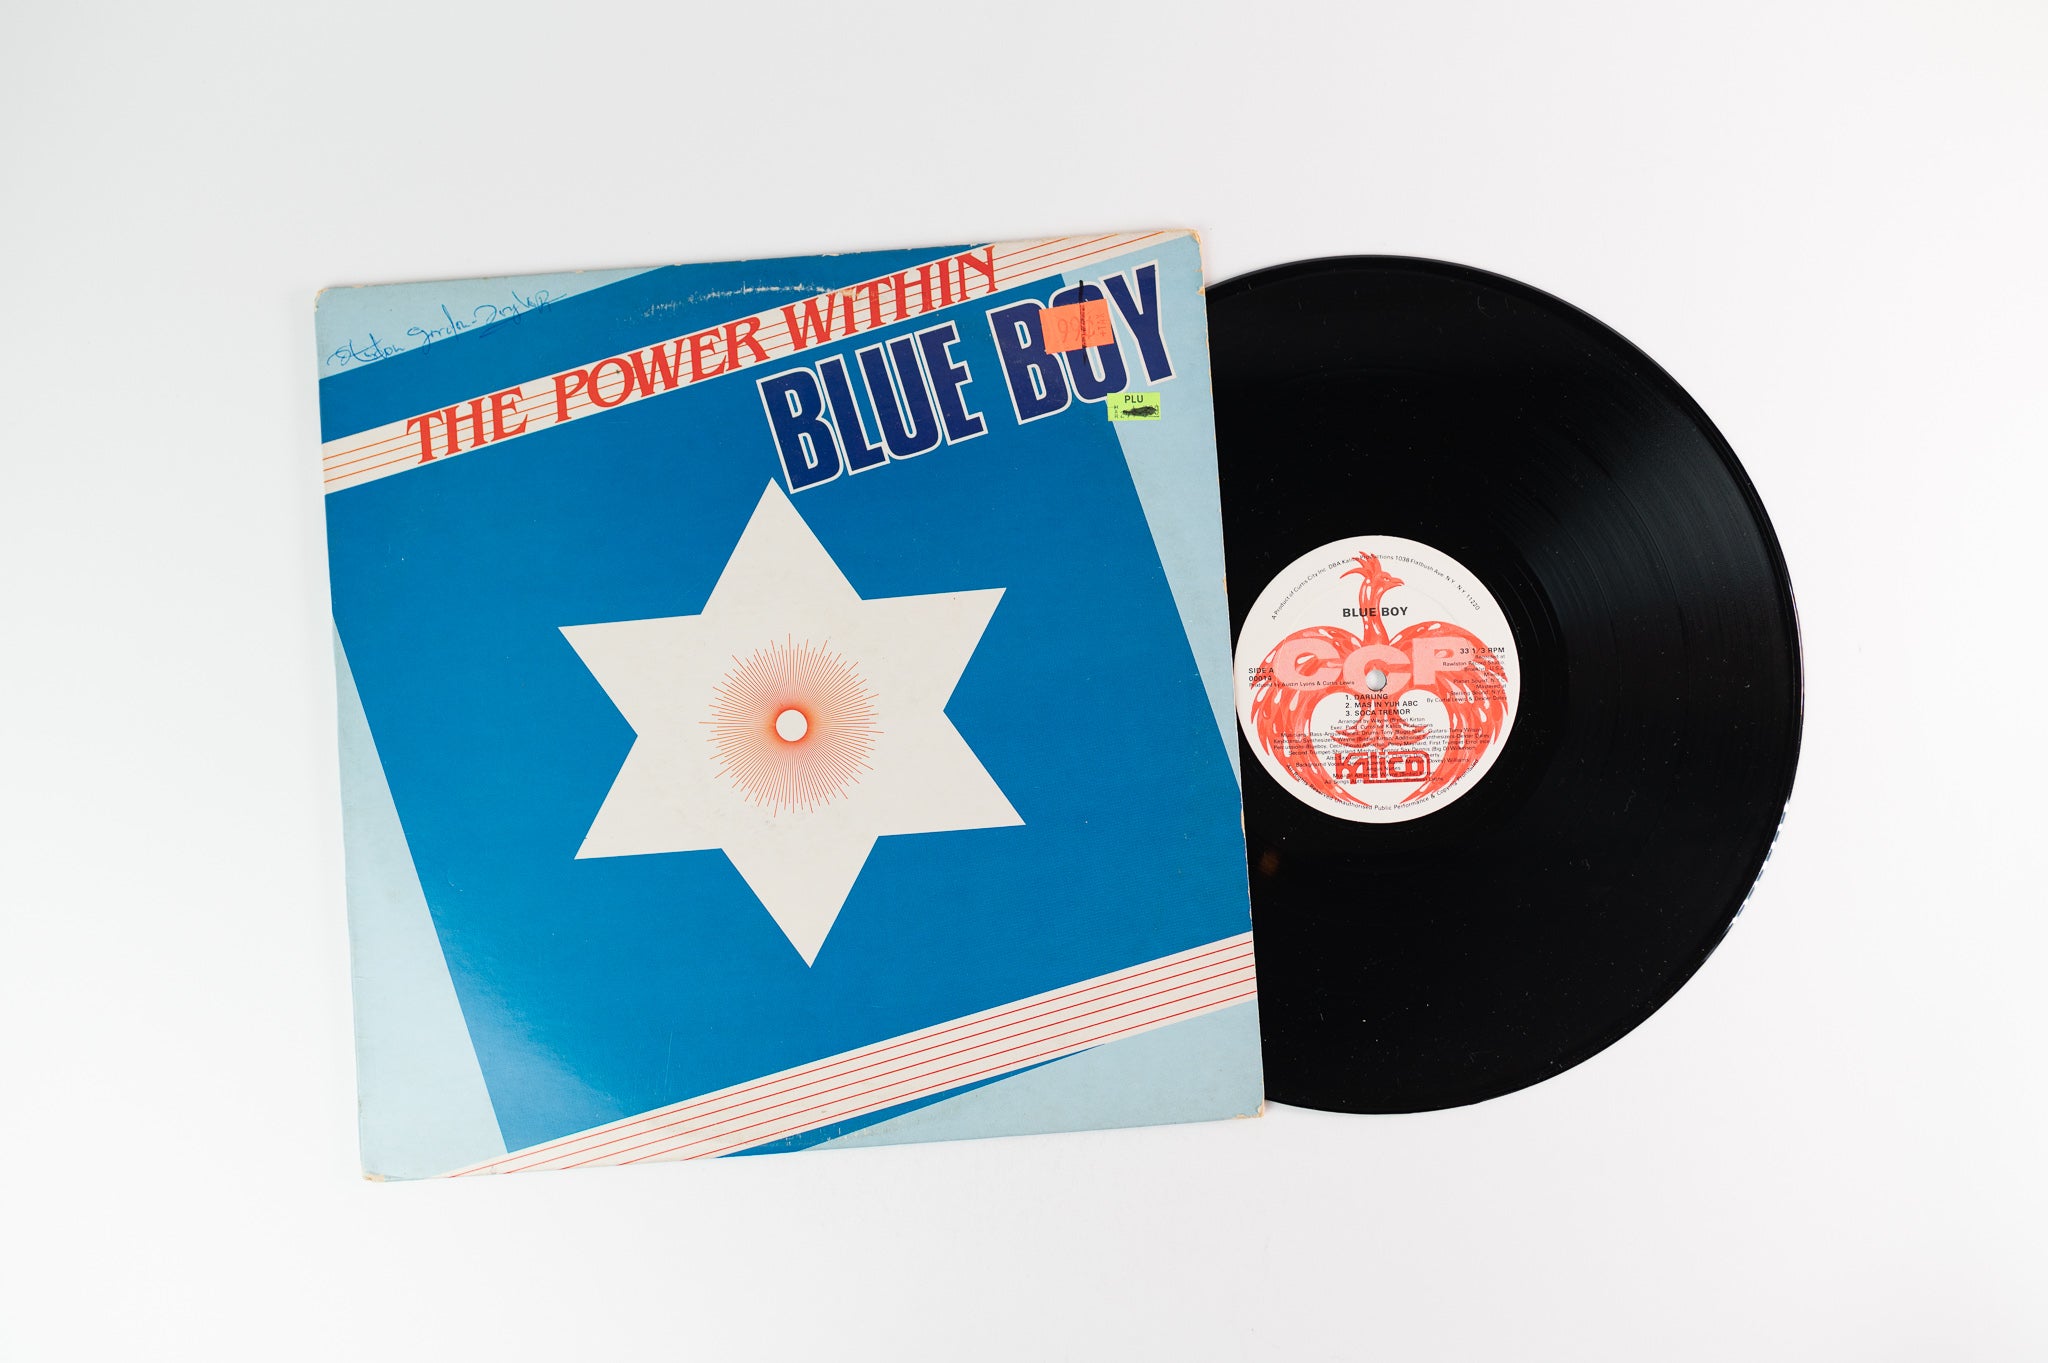 Blue Boy - The Power Within on Kalico Records